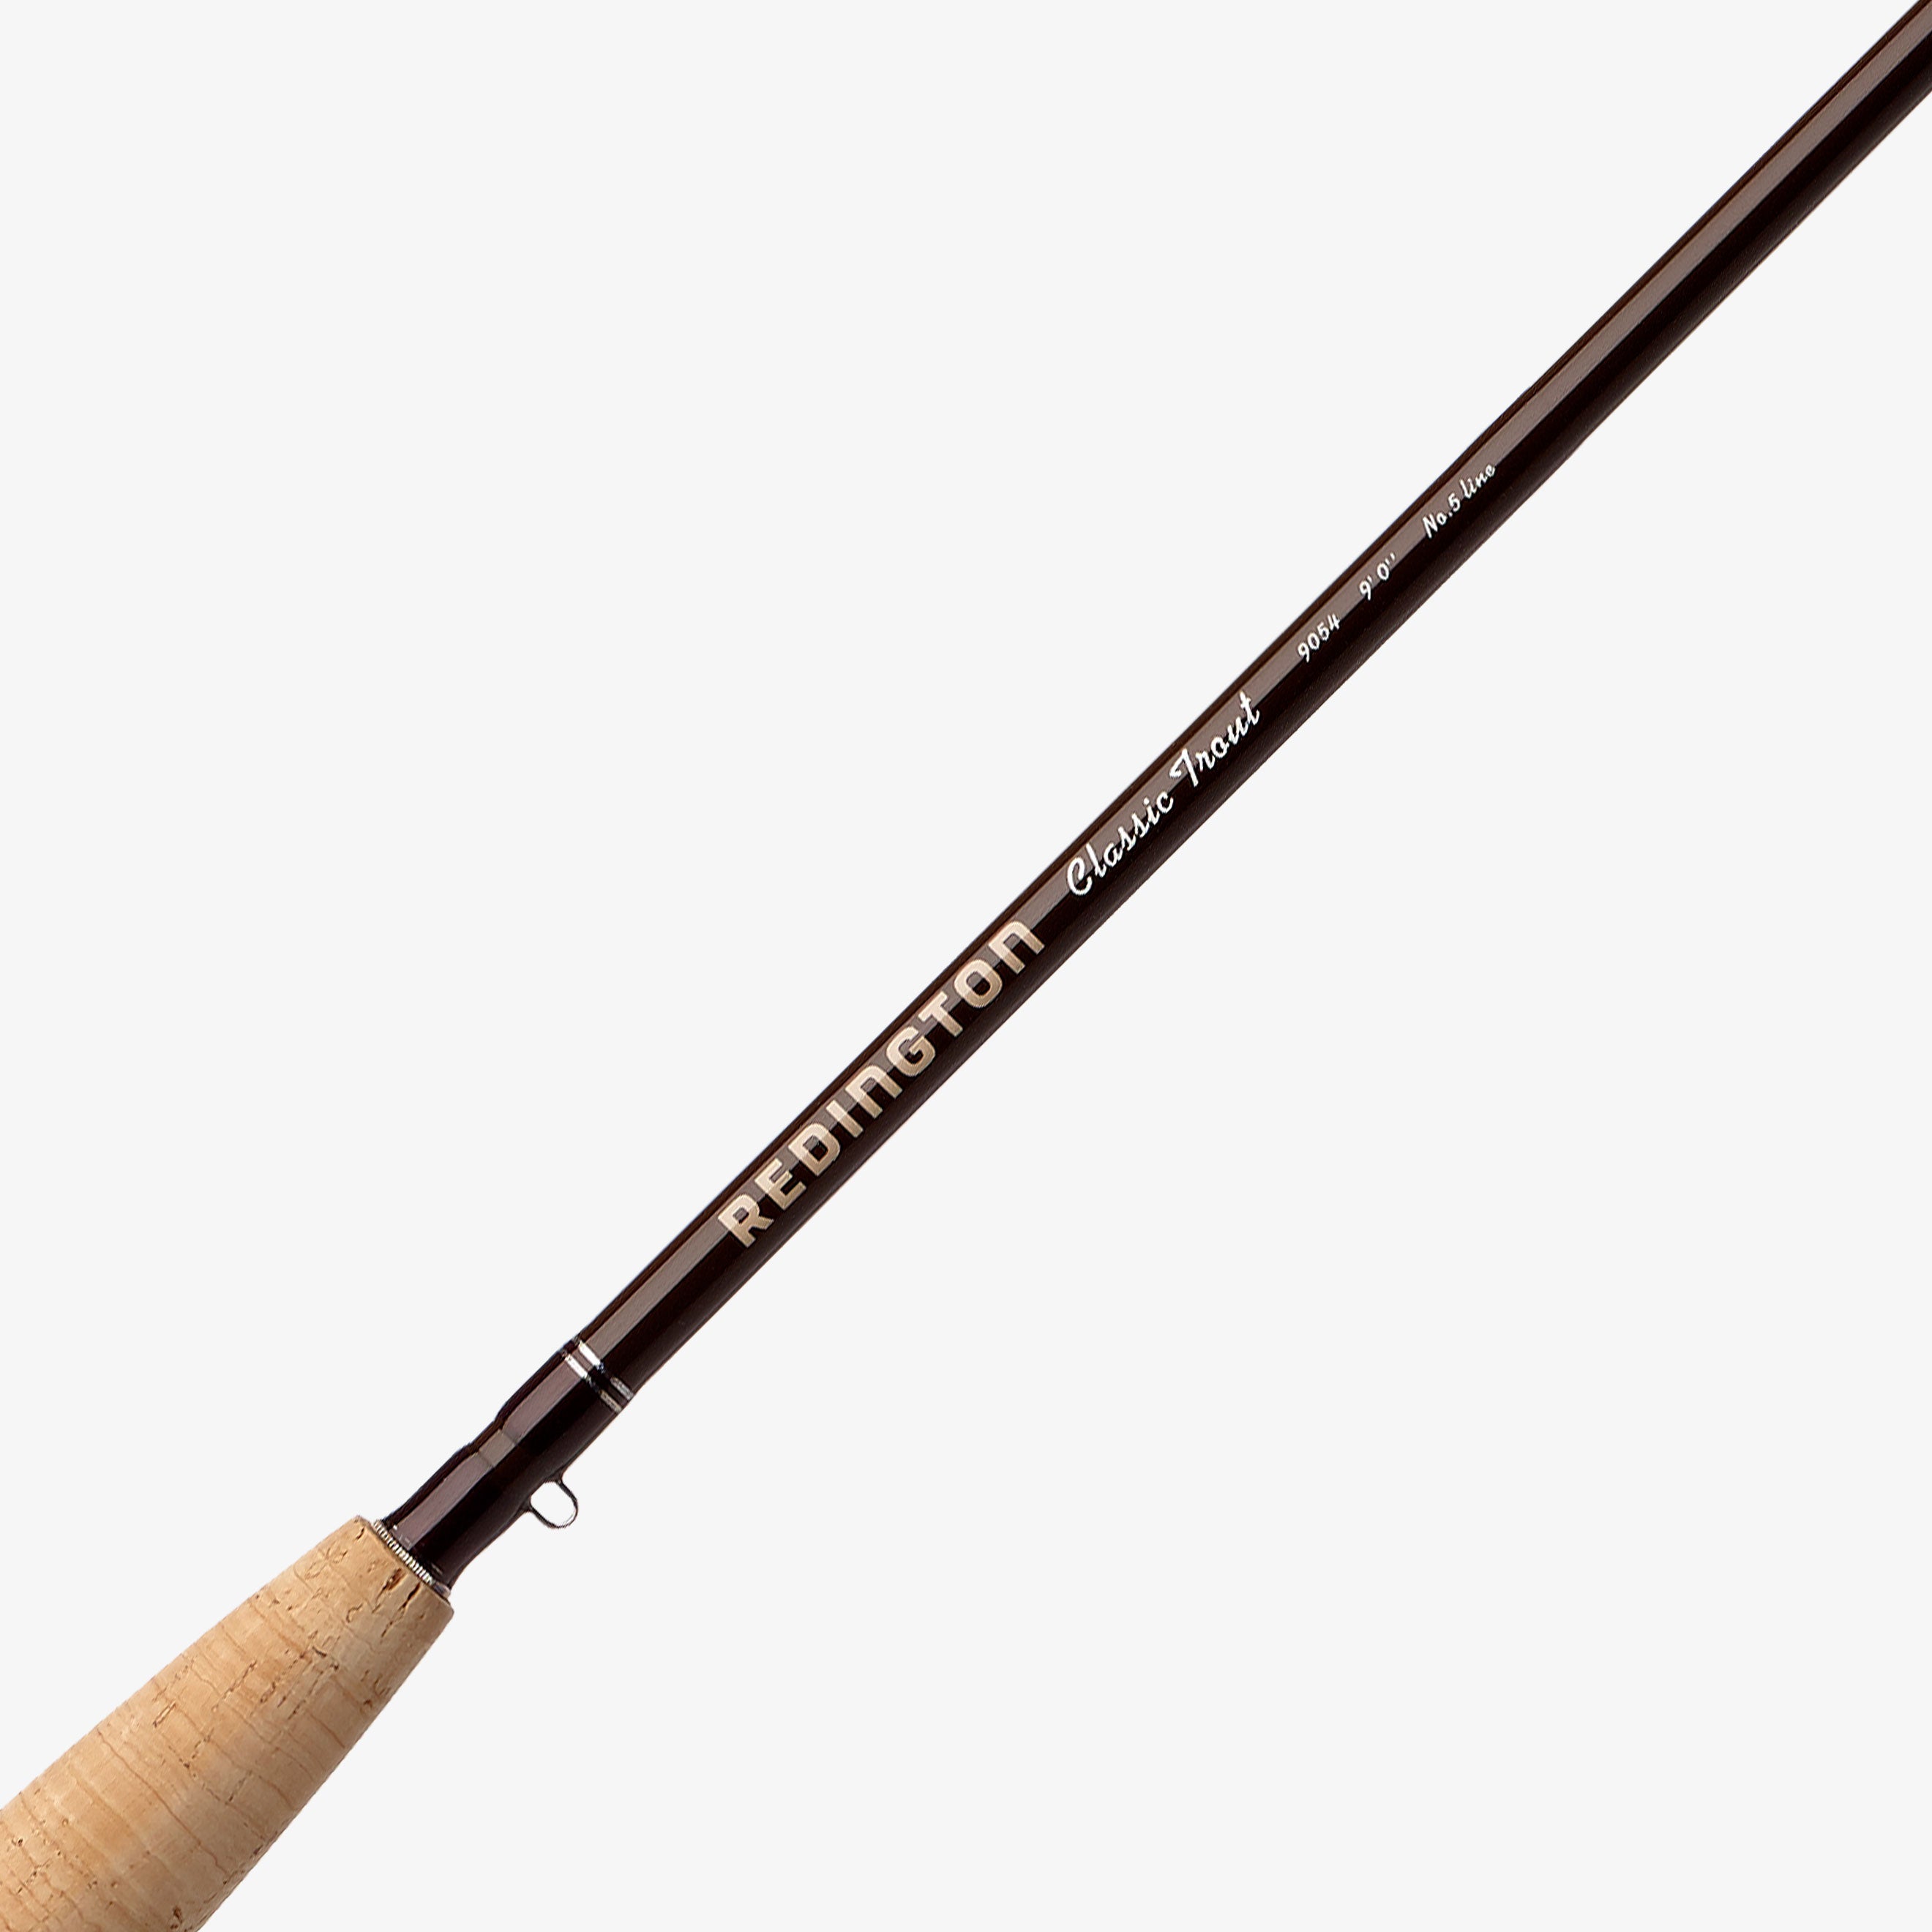 CLASSIC TROUT Fly Fishing Rod 6 Weight, 9ft